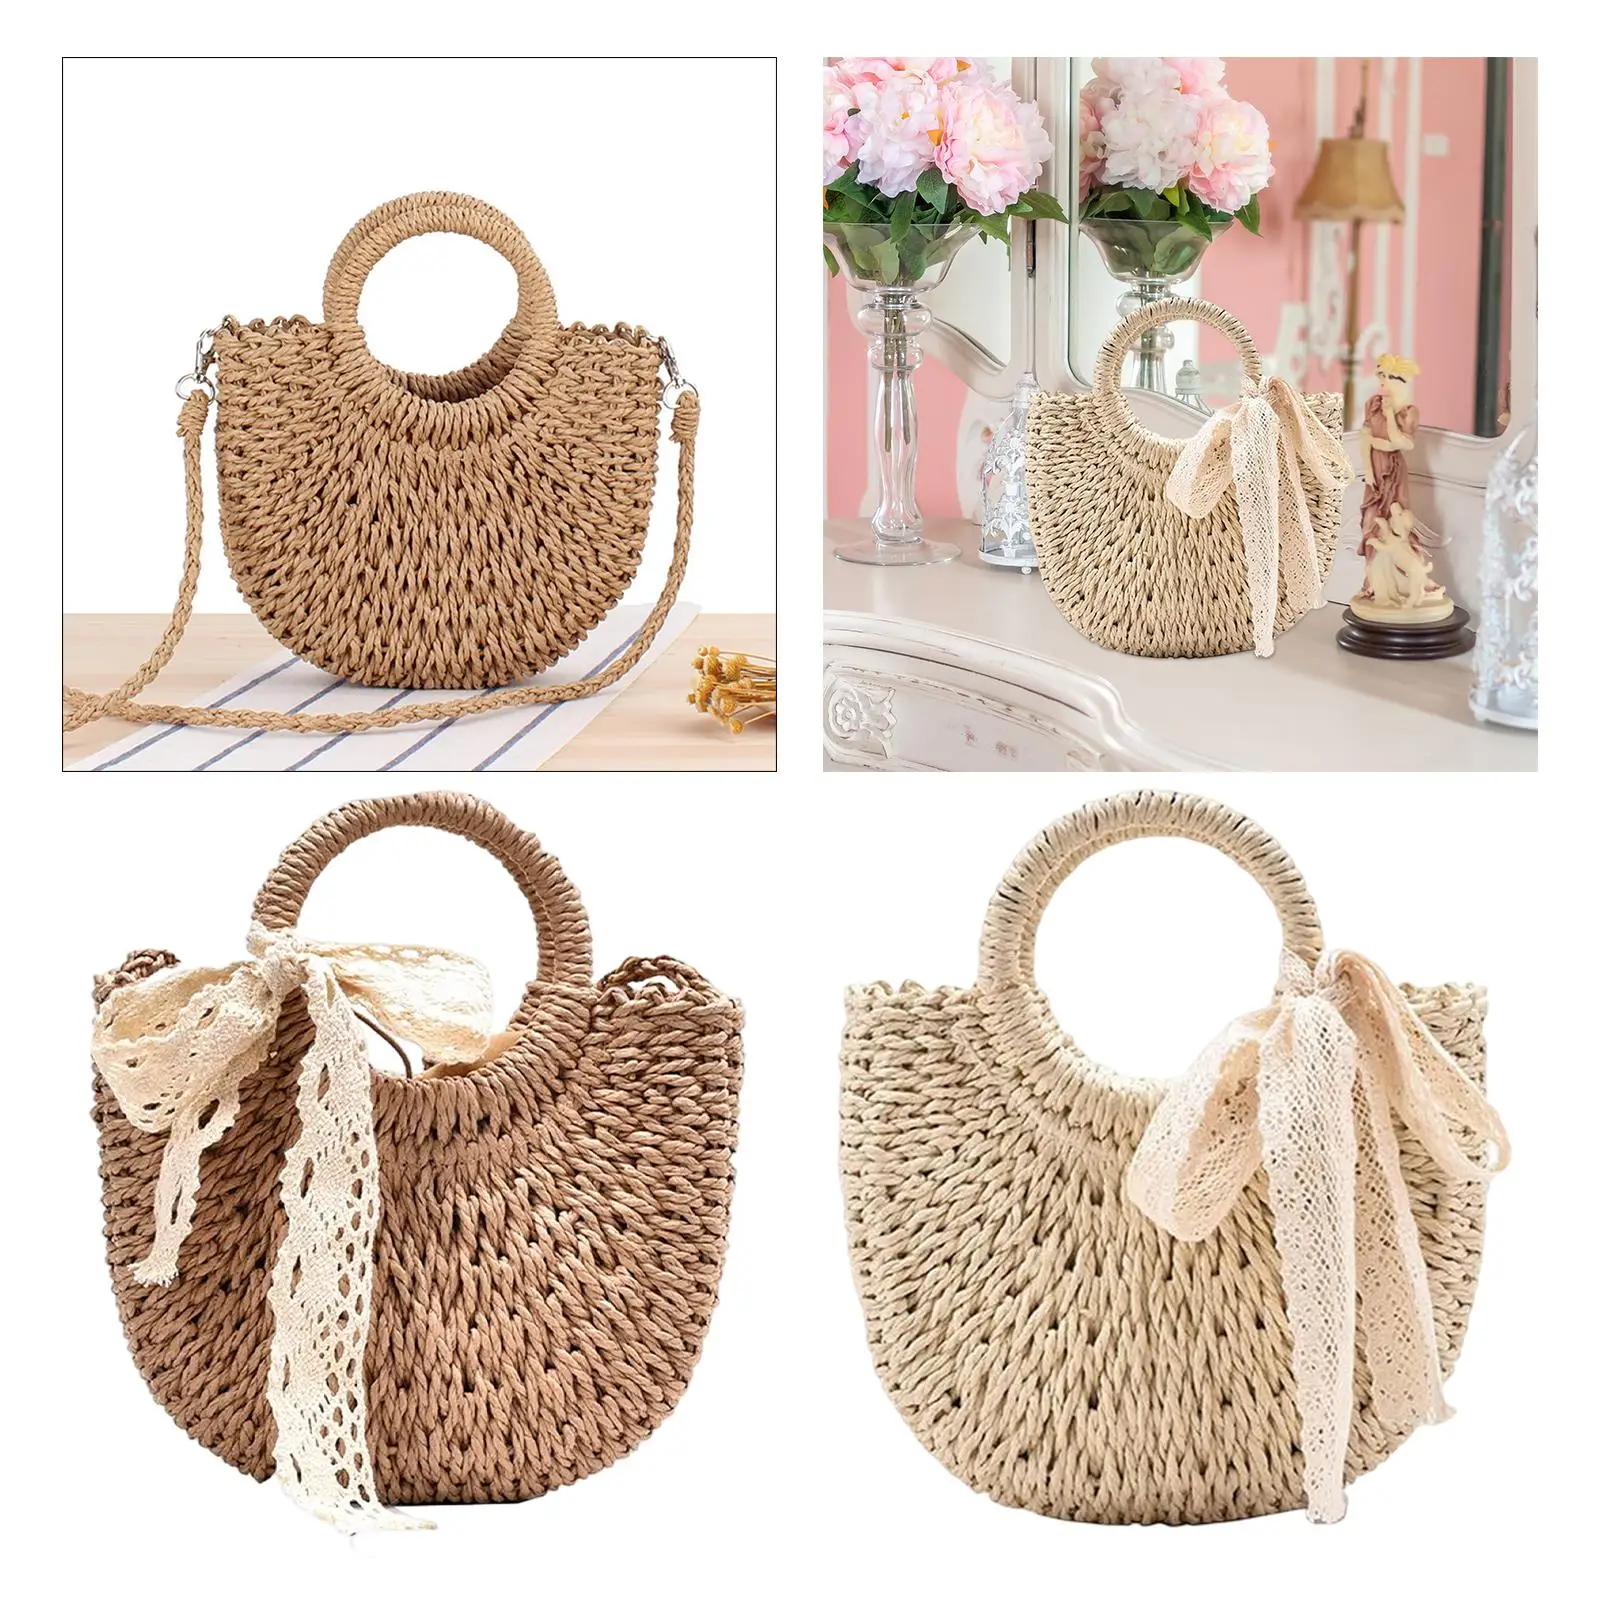 Summer Straw Bag Big Capacity with Handle Woven Handbag Shoulder Bag with Lace Basket for Casual Shopping Vacation Beach Travel